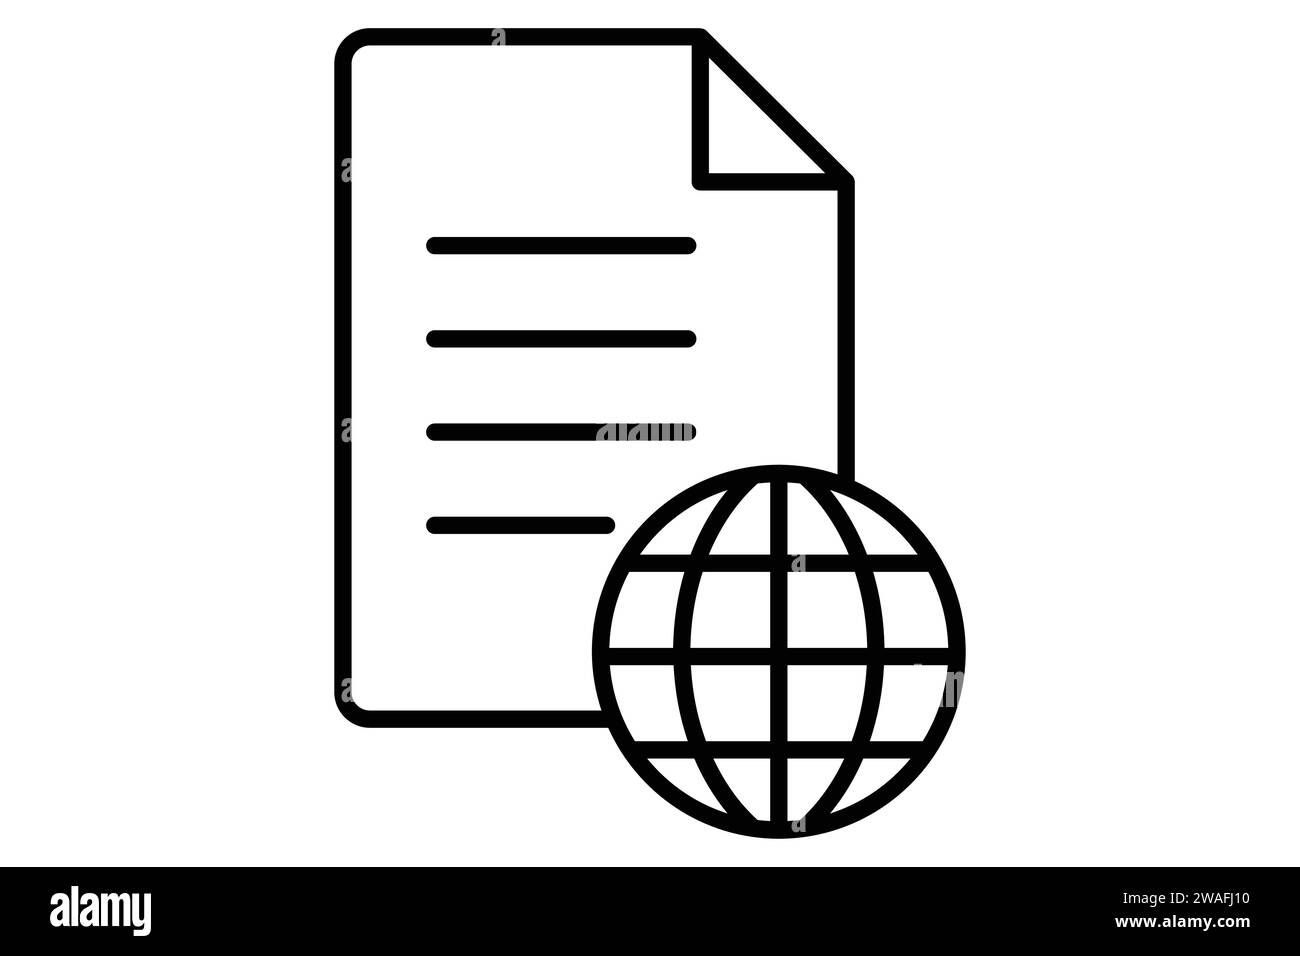 document with earth icon. icon related to travel, international travel documents. line icon style. element illustration Stock Vector